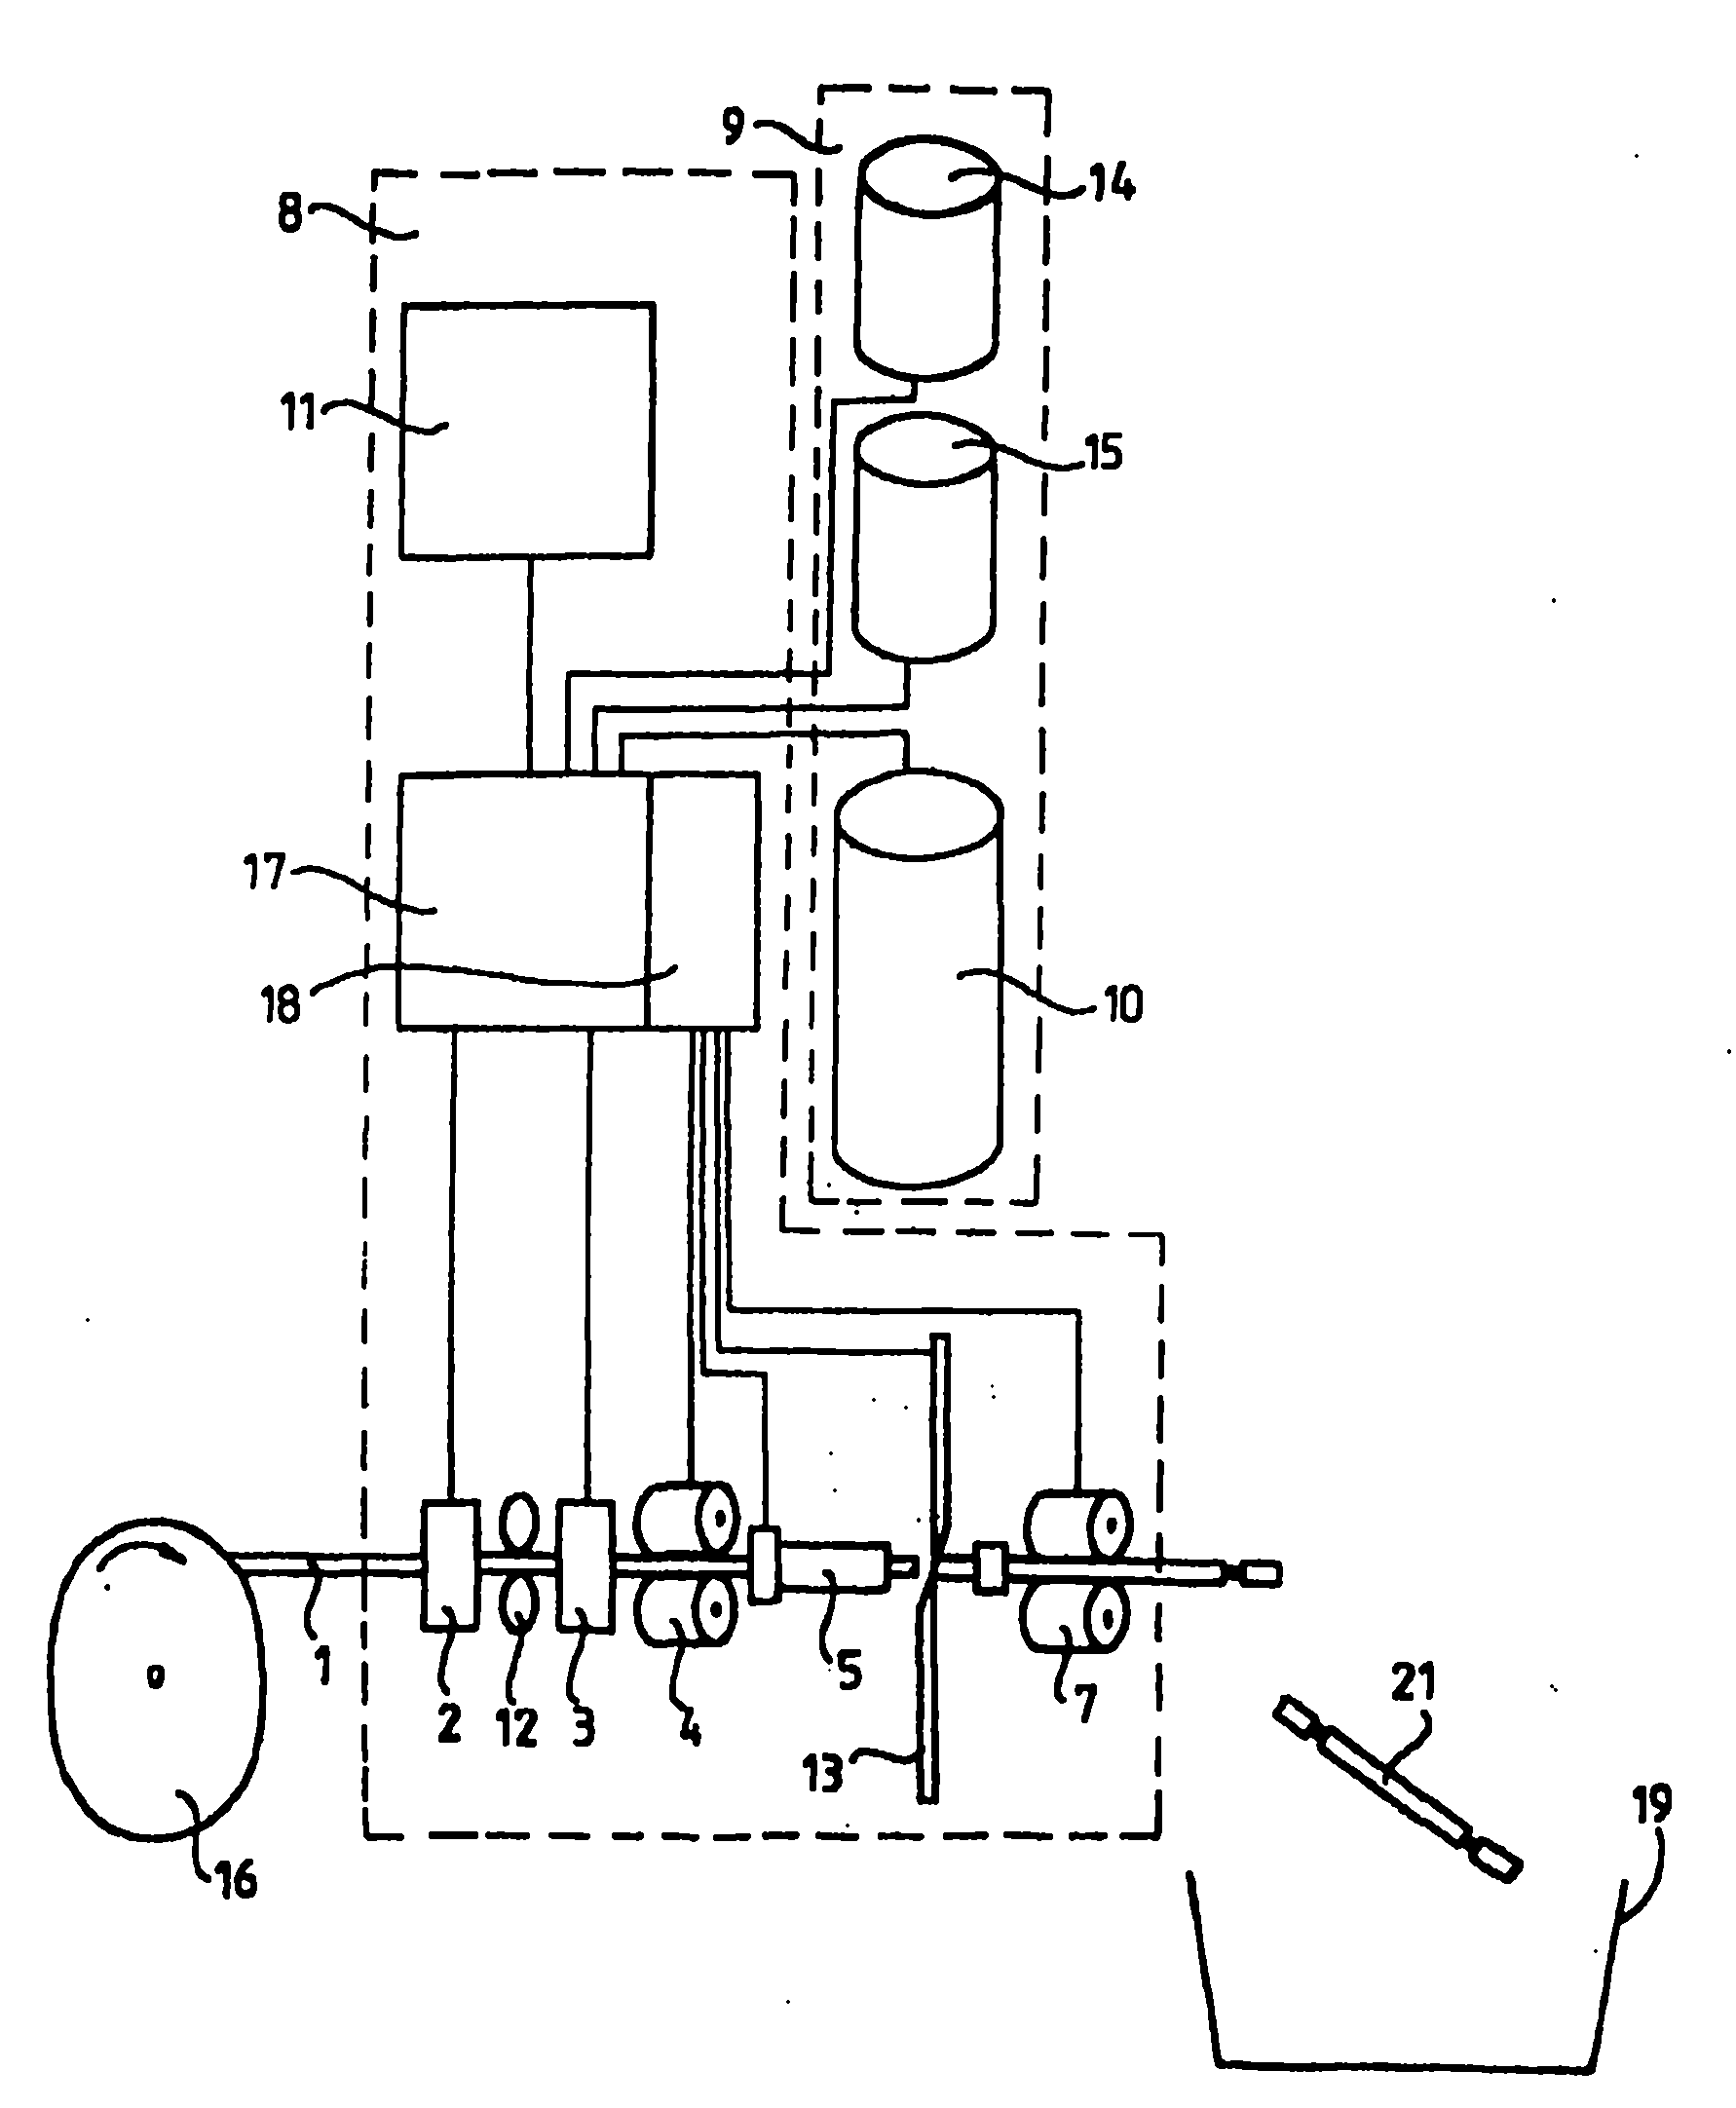 Machine and method for automated detection of cables, wires and profiles in or on cable processing machines